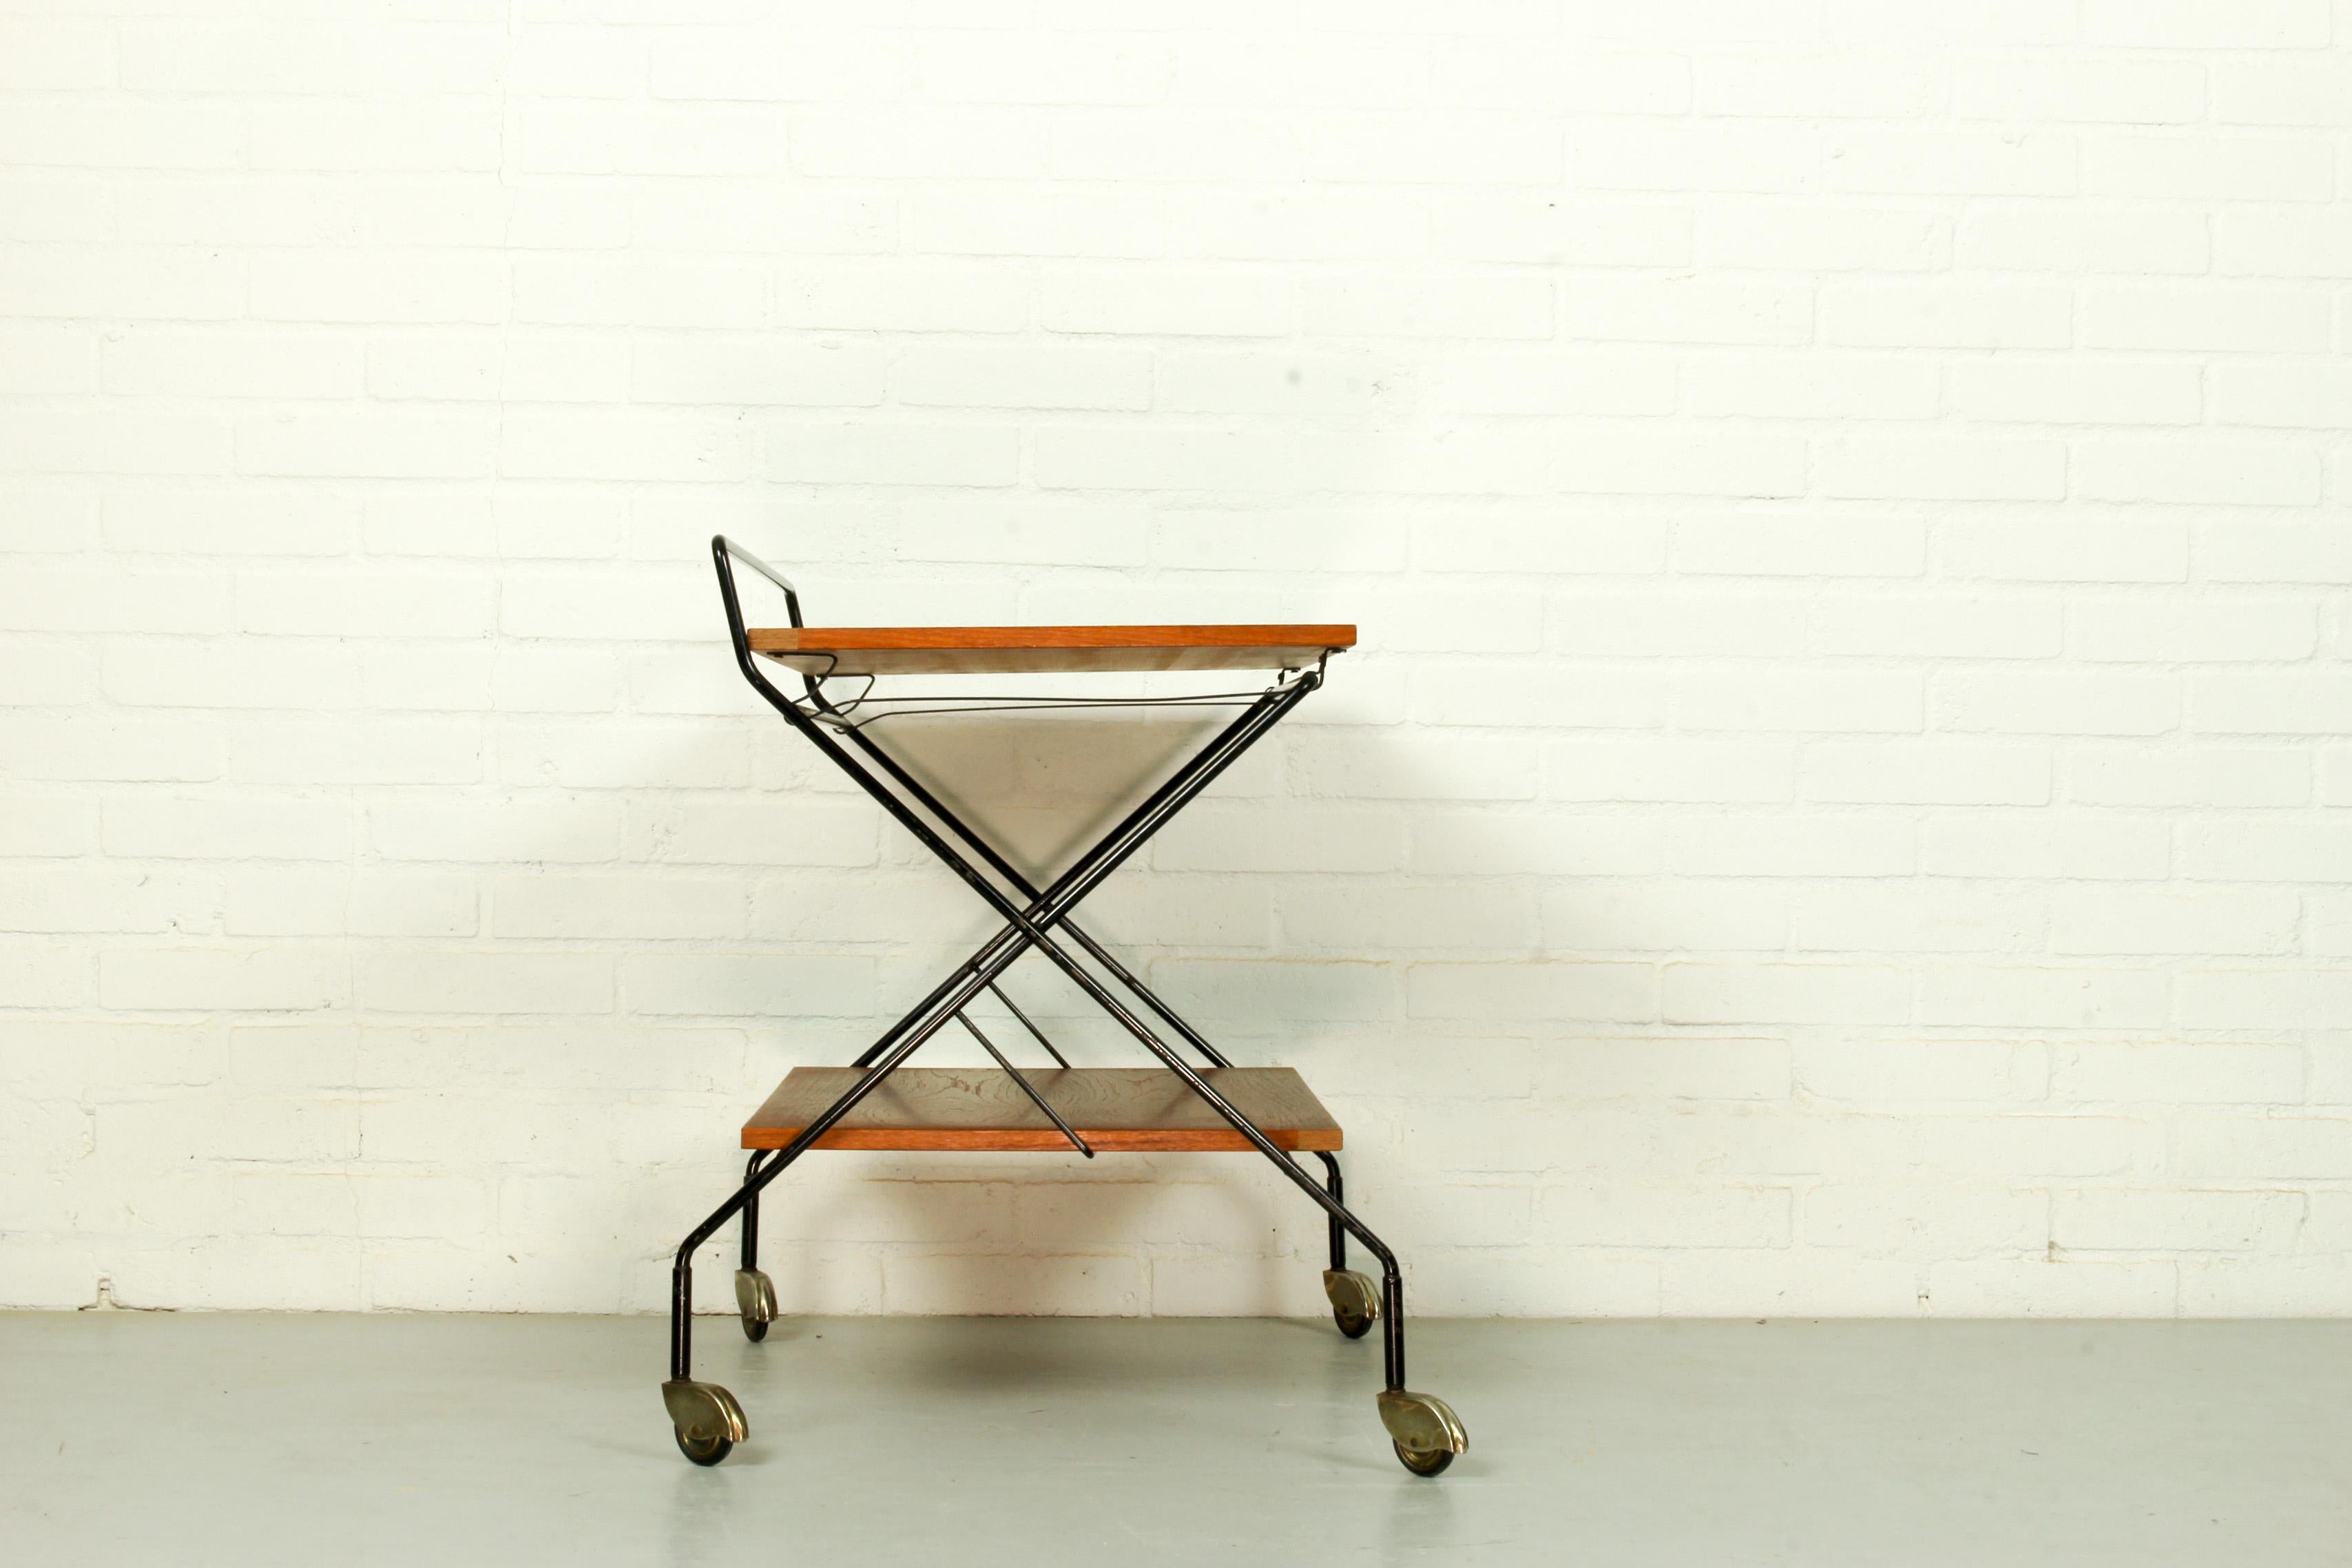 Vintage tea trolley from the 1960s. The cart has 2 teak blades, a black metal frame and stands on metal wheels. A special feature of this model is that it is foldable.
 